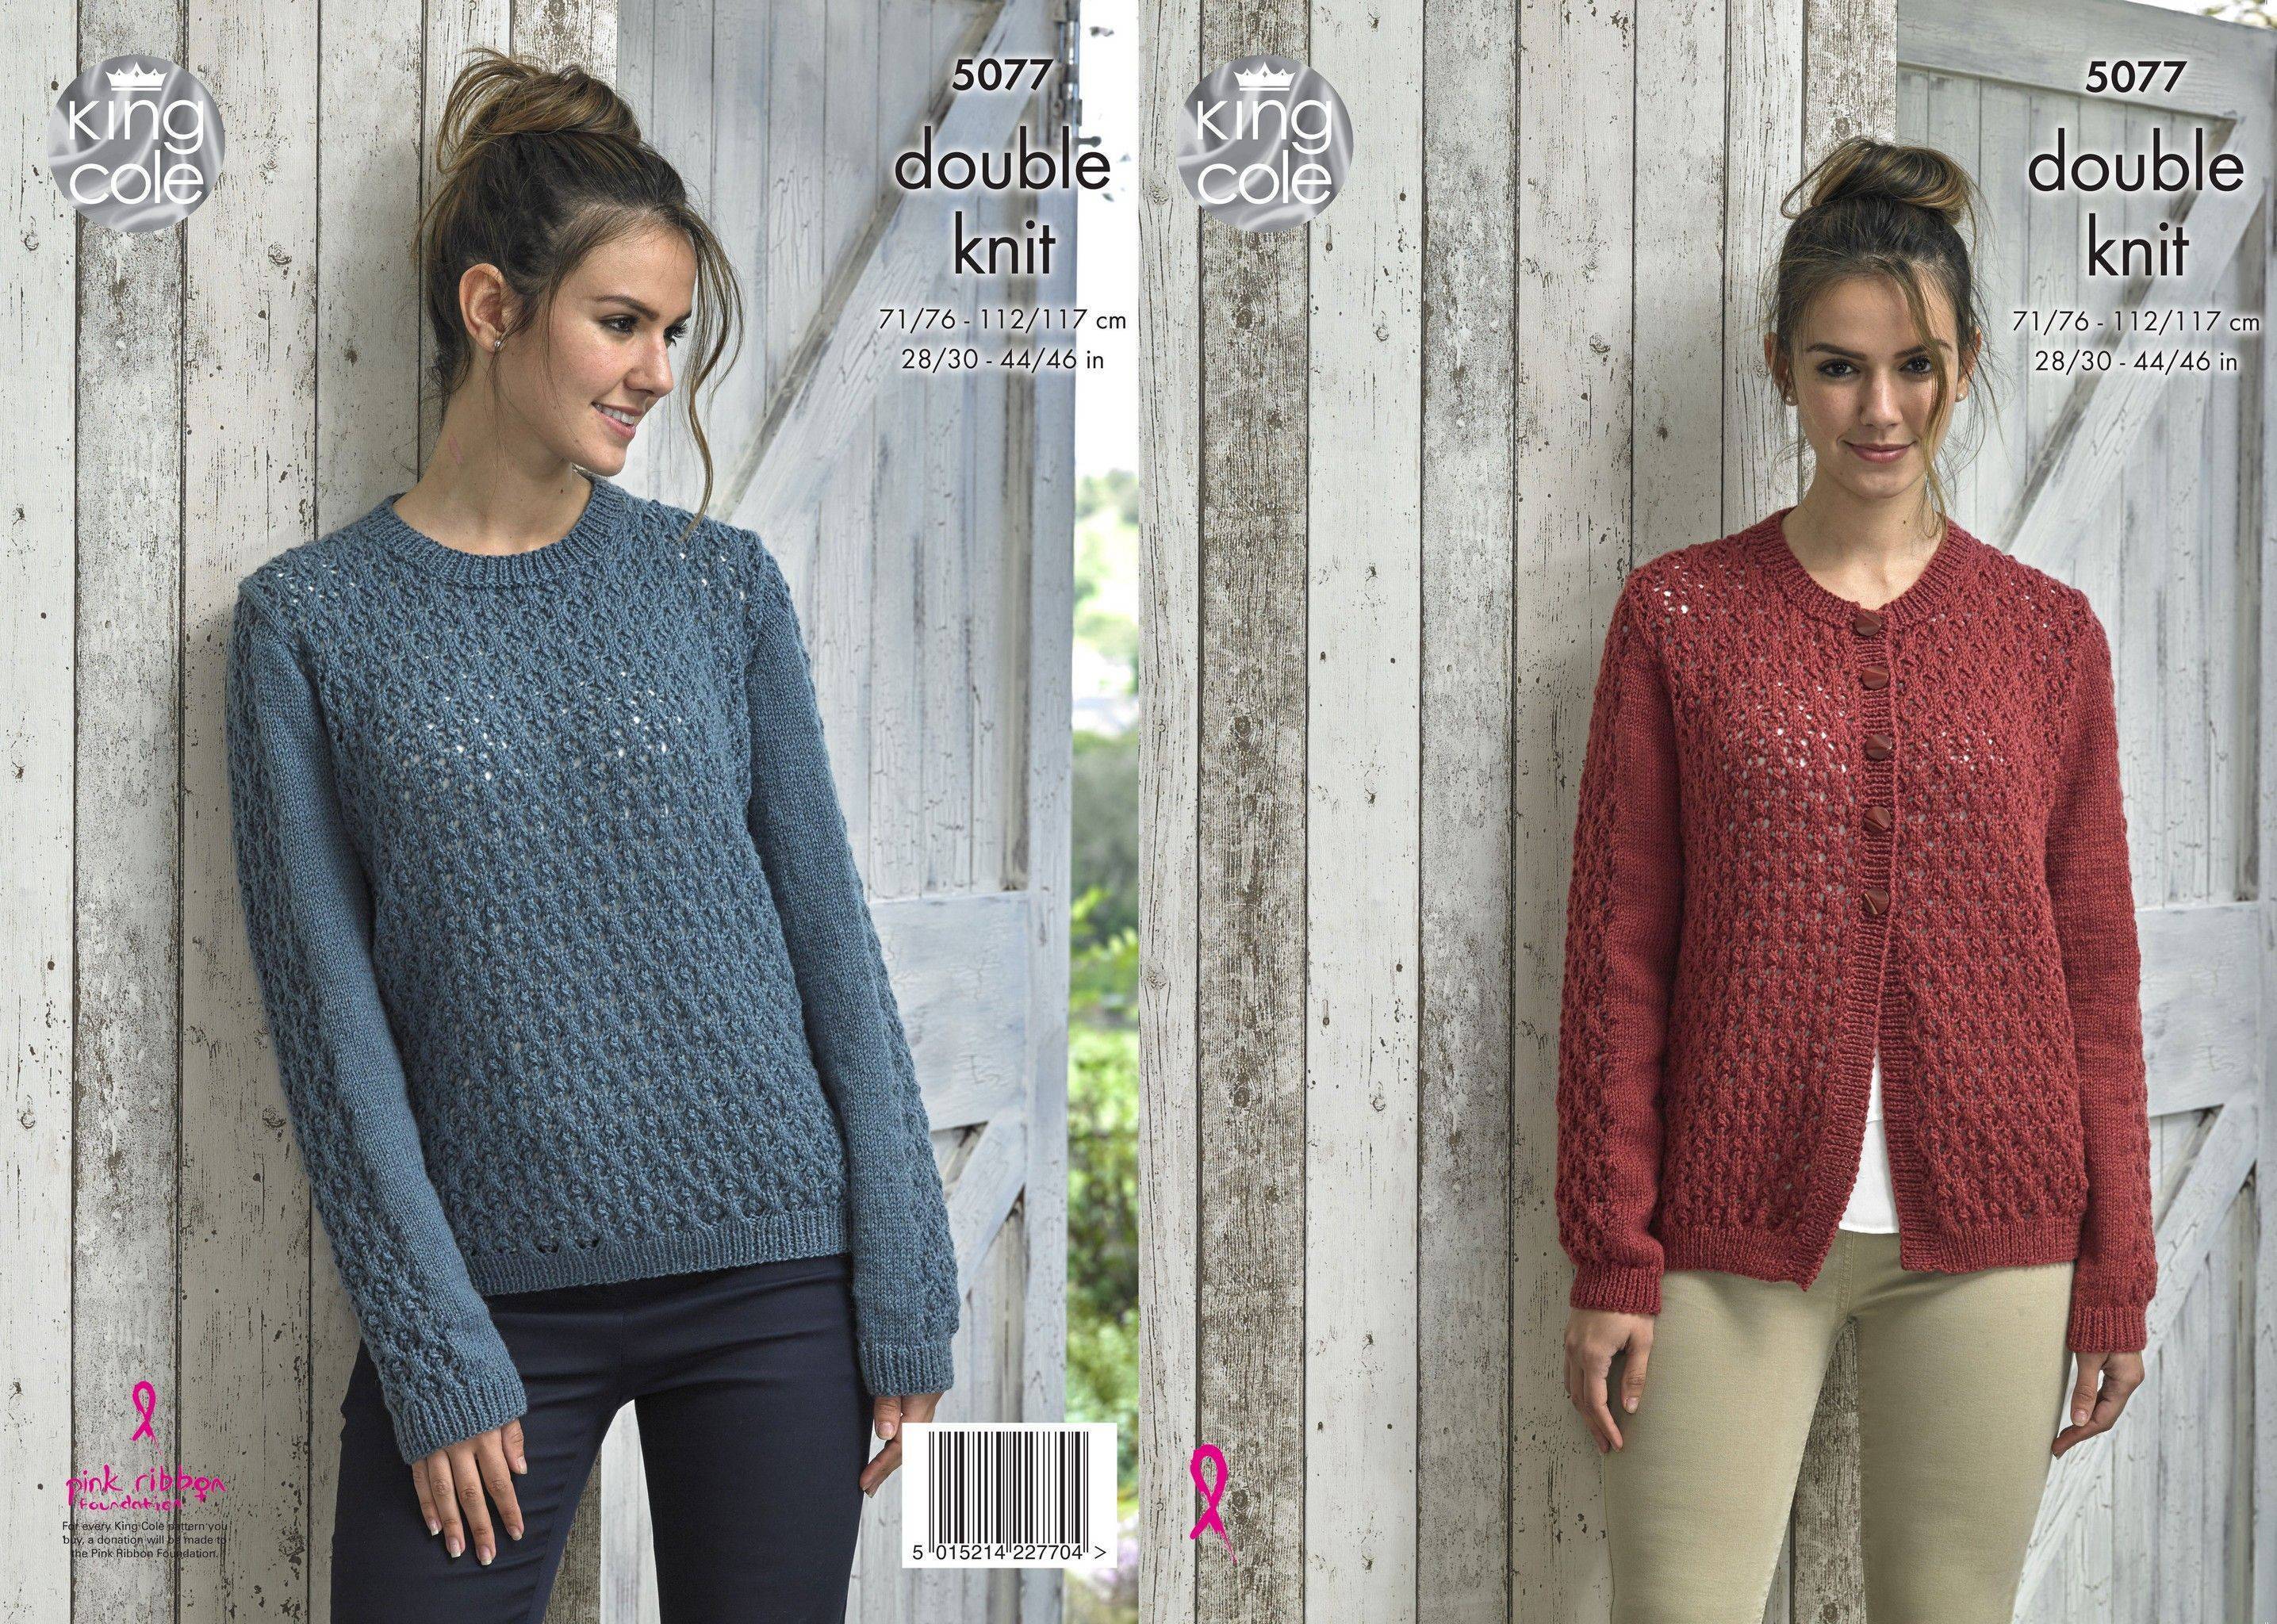 Cardigan and Sweater in King Cole Merino Blend DK (5077) | The Knitting ...